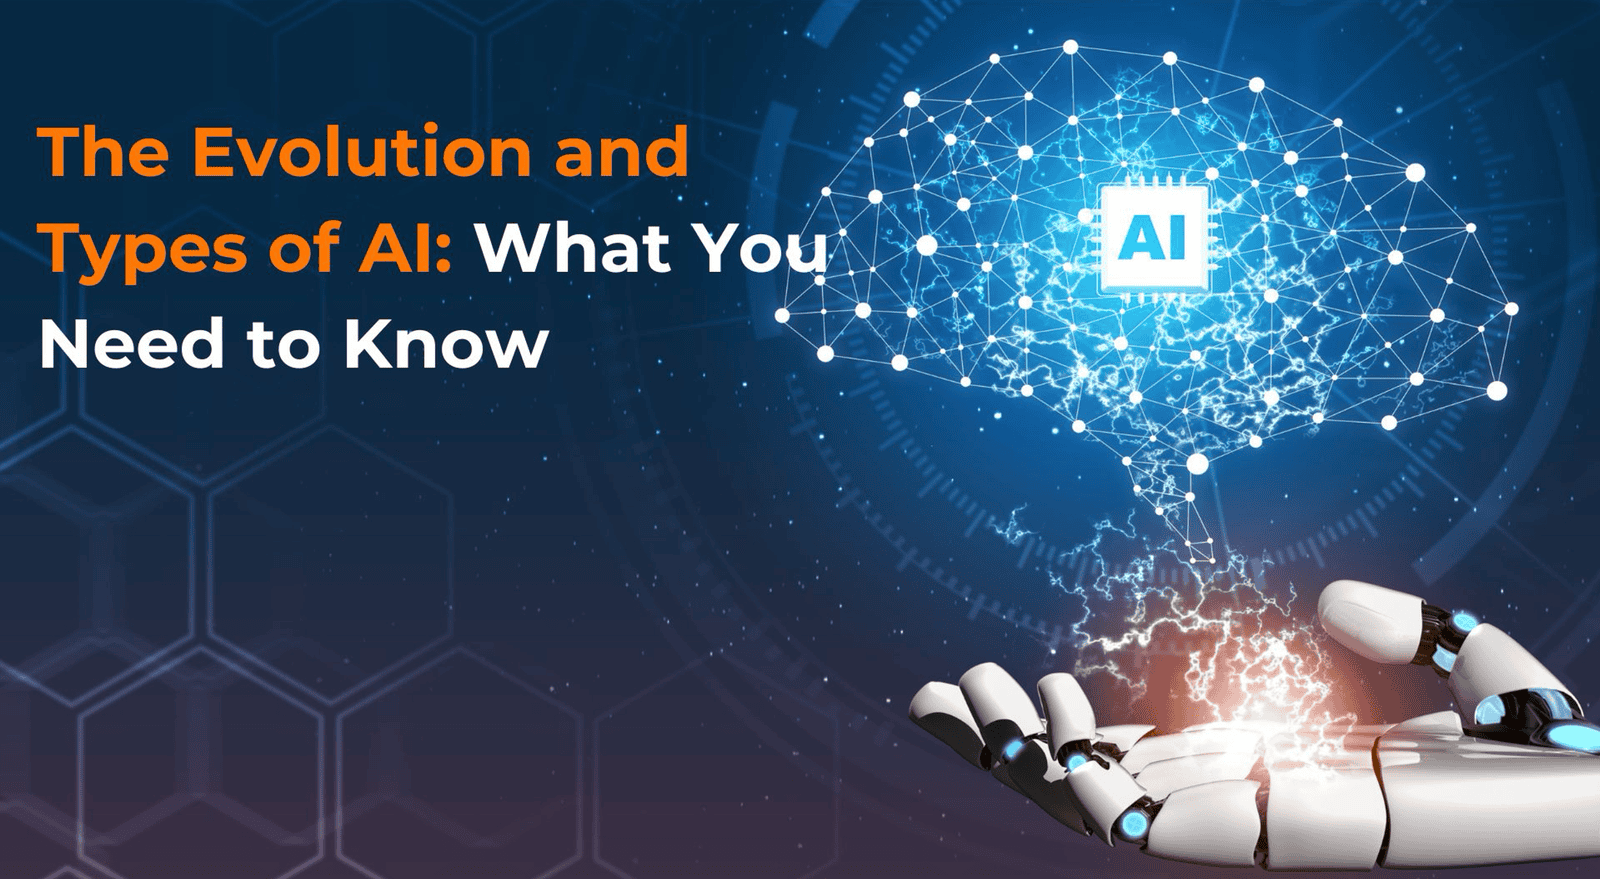 The Evolution and Types of AI: What You Need to Know